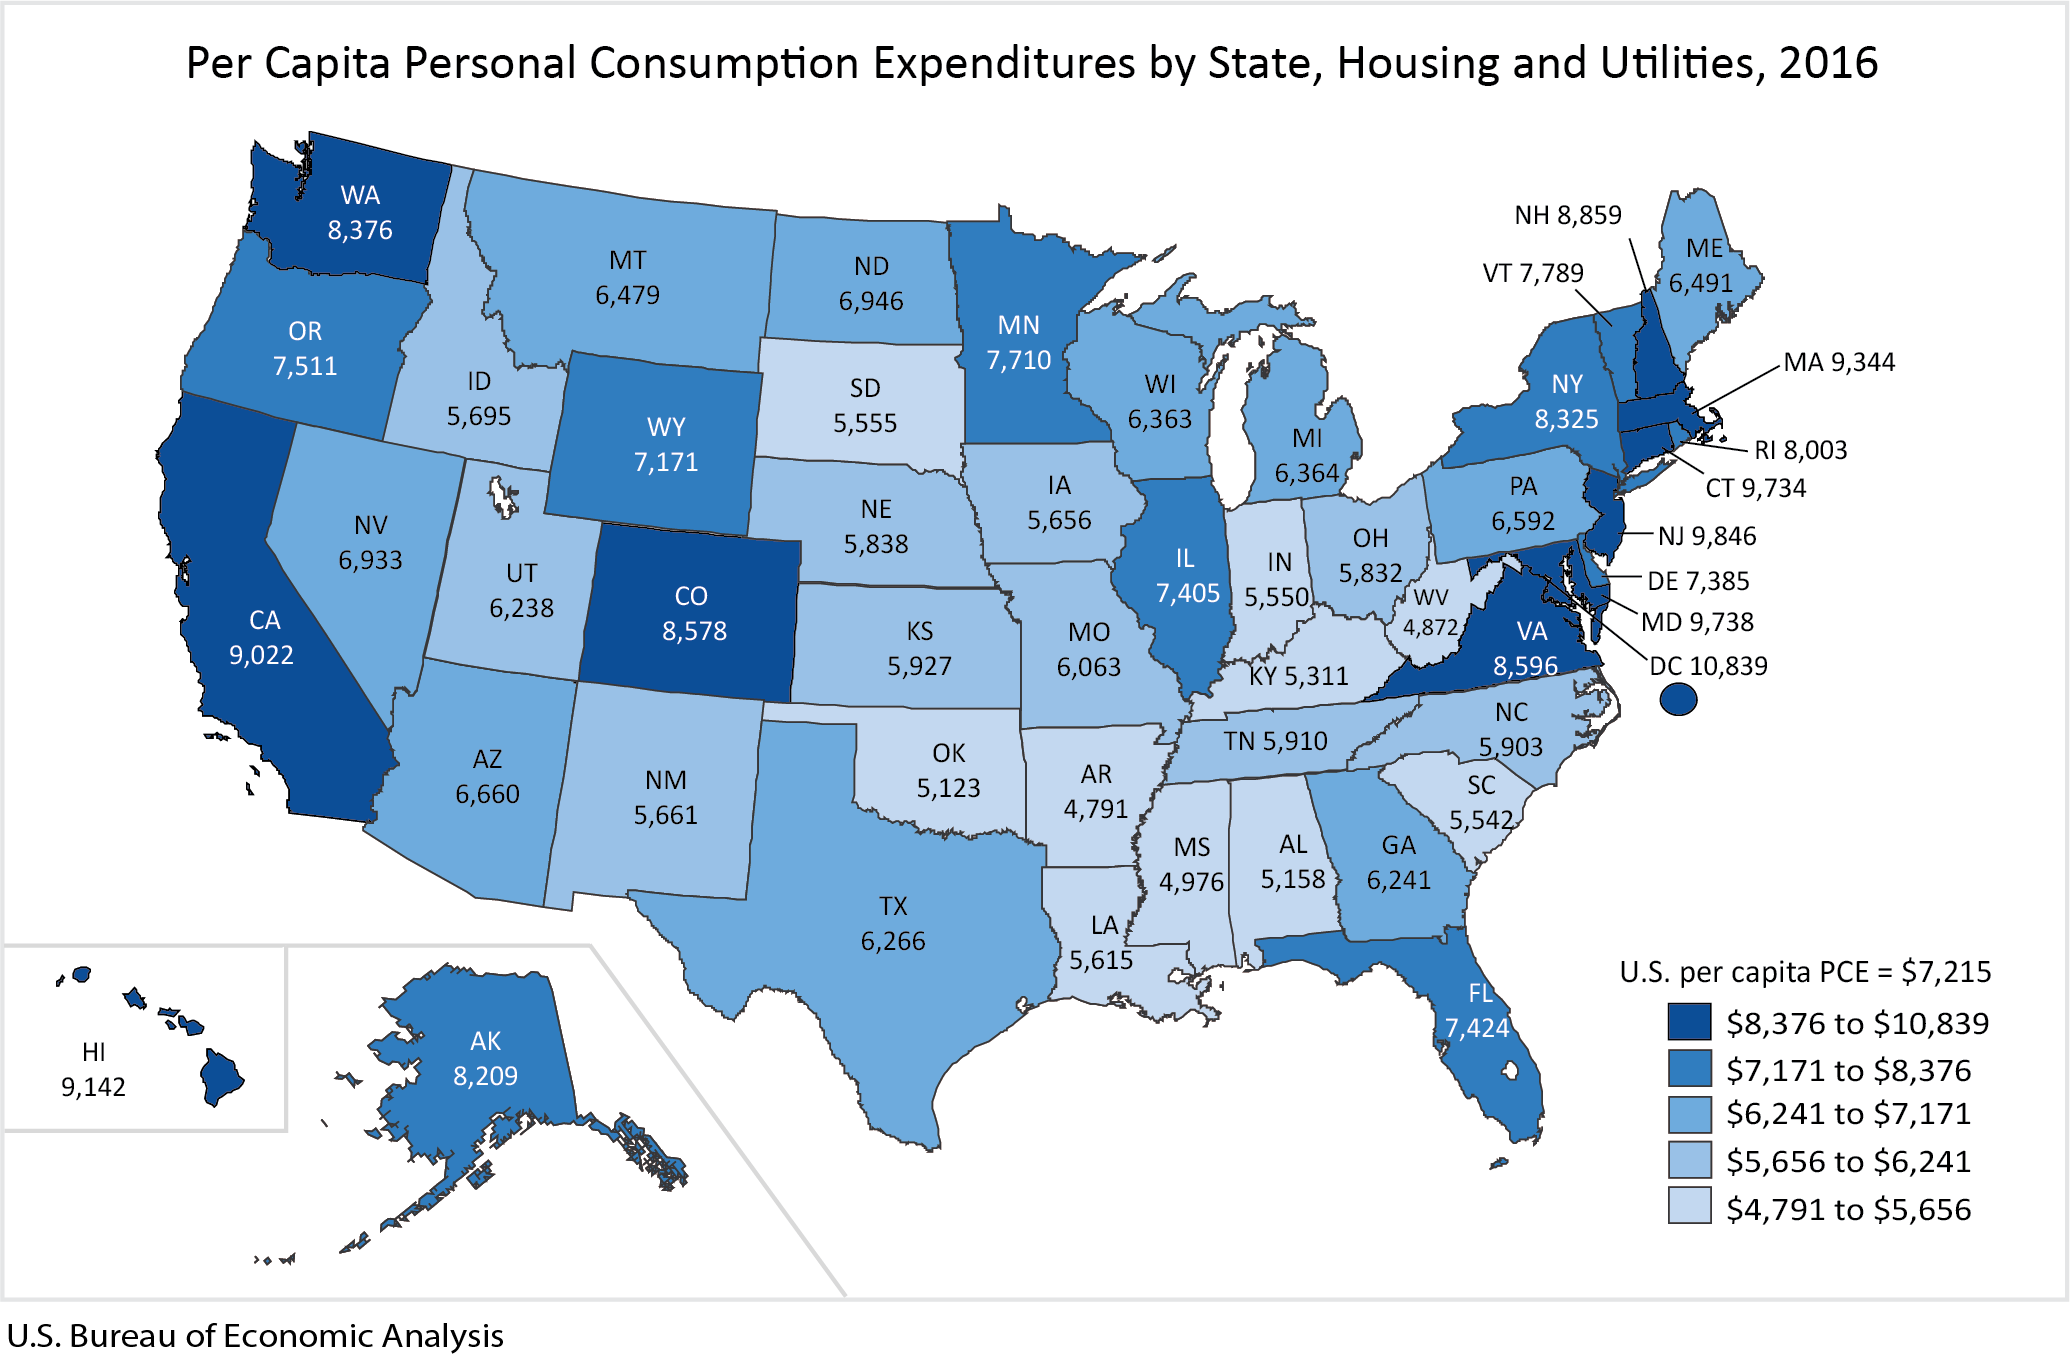 Per Capita Personal Consumption Expenditures by State, Housing and Utilities 2016